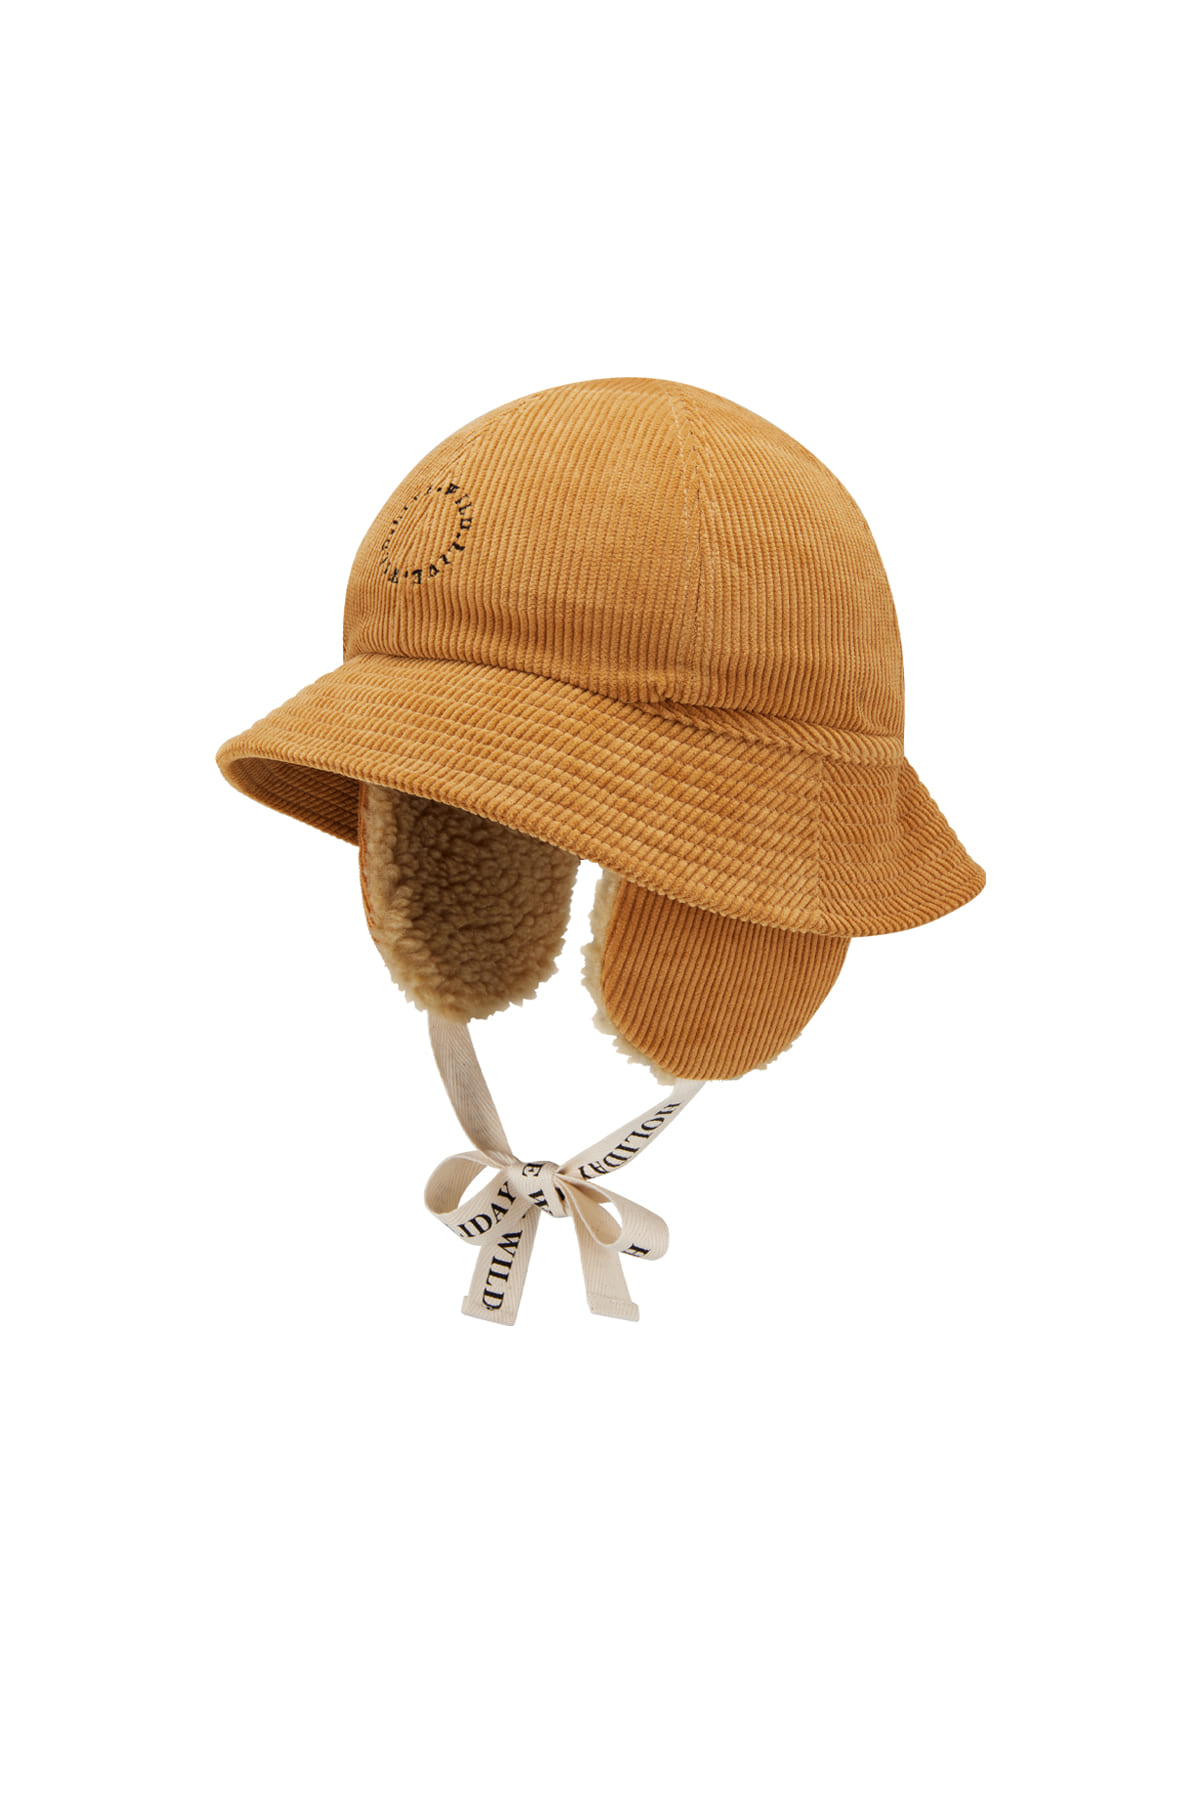 3 UTIL BUCKET HAT-CAMELHOLIDAY OUTERWEAR